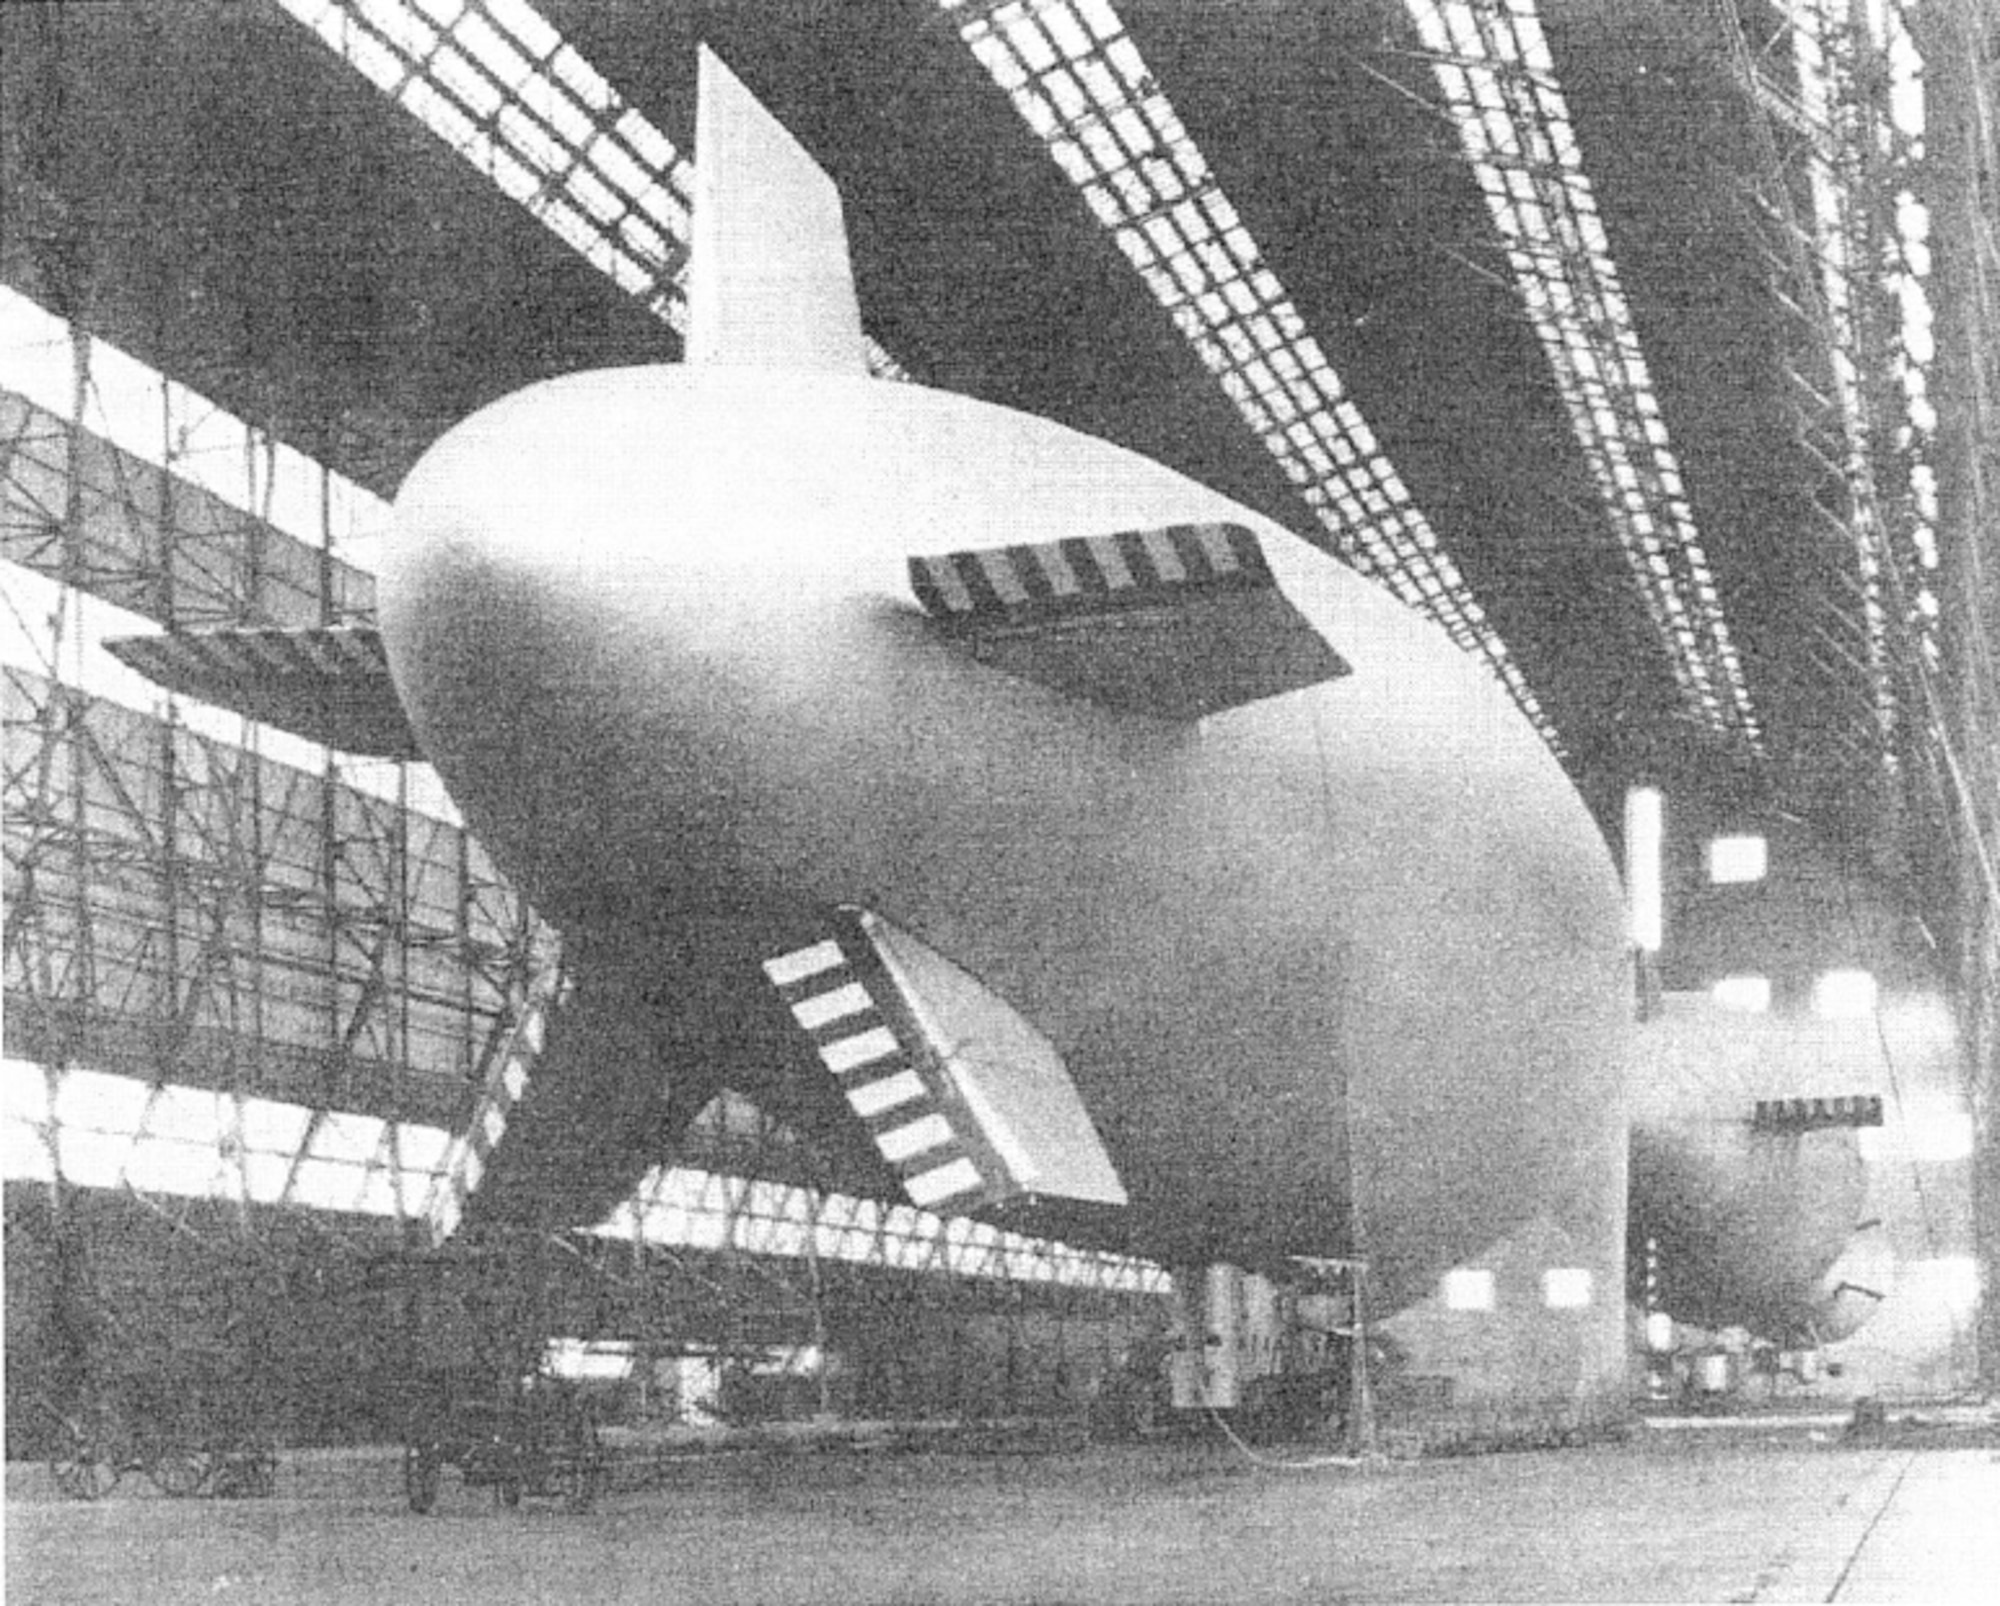 TC-14 rear view docked inside the Scott Field Airship Hangar with airship TC-11 on 20 February 1936 and showing five-fin tail.